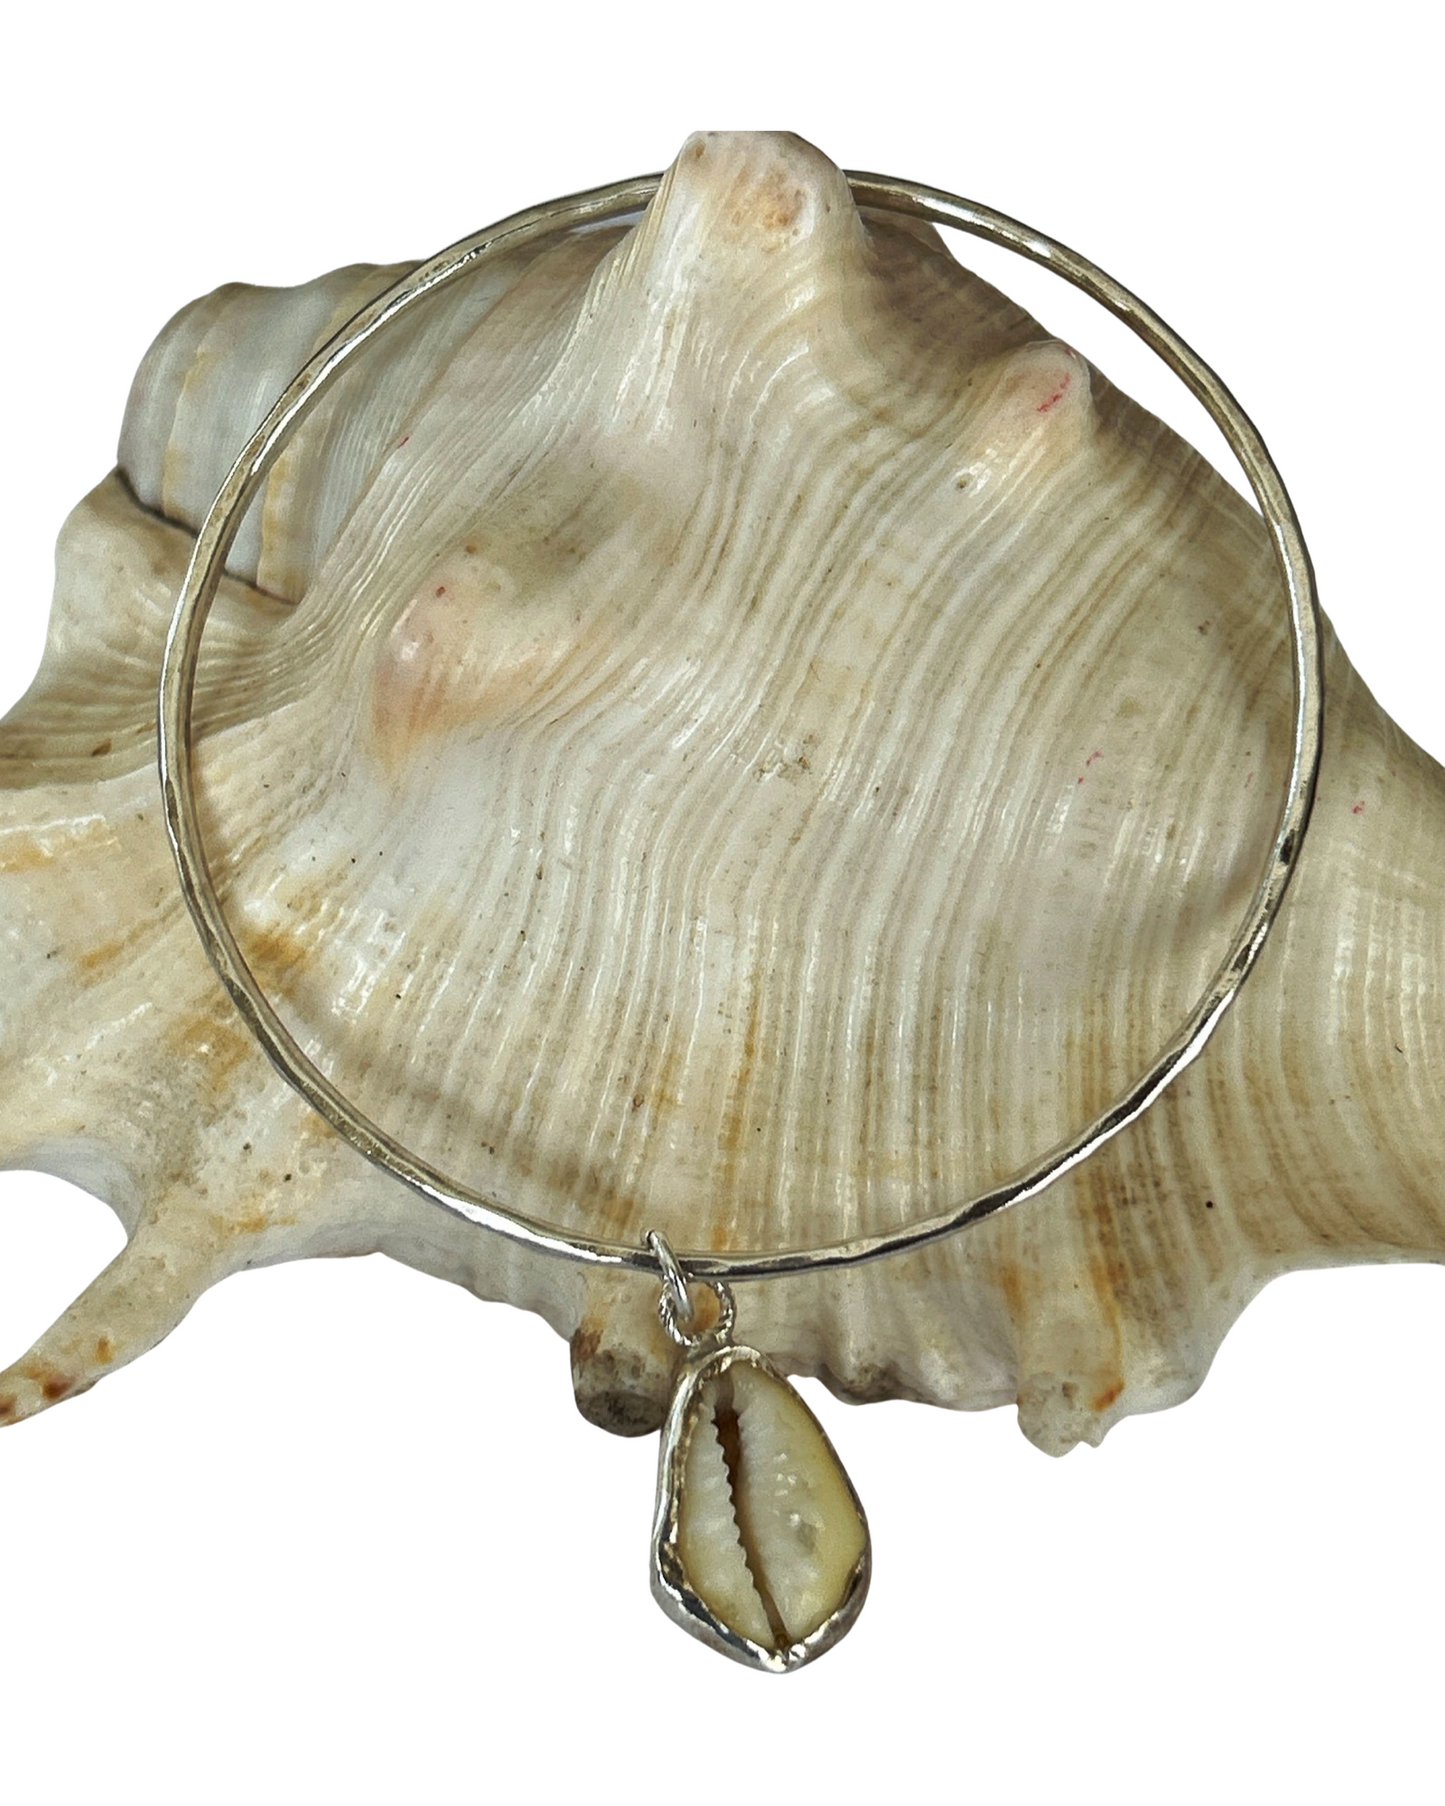 Silver Bangle With Cowrie Shell Charm - Silver Lines Jewellery